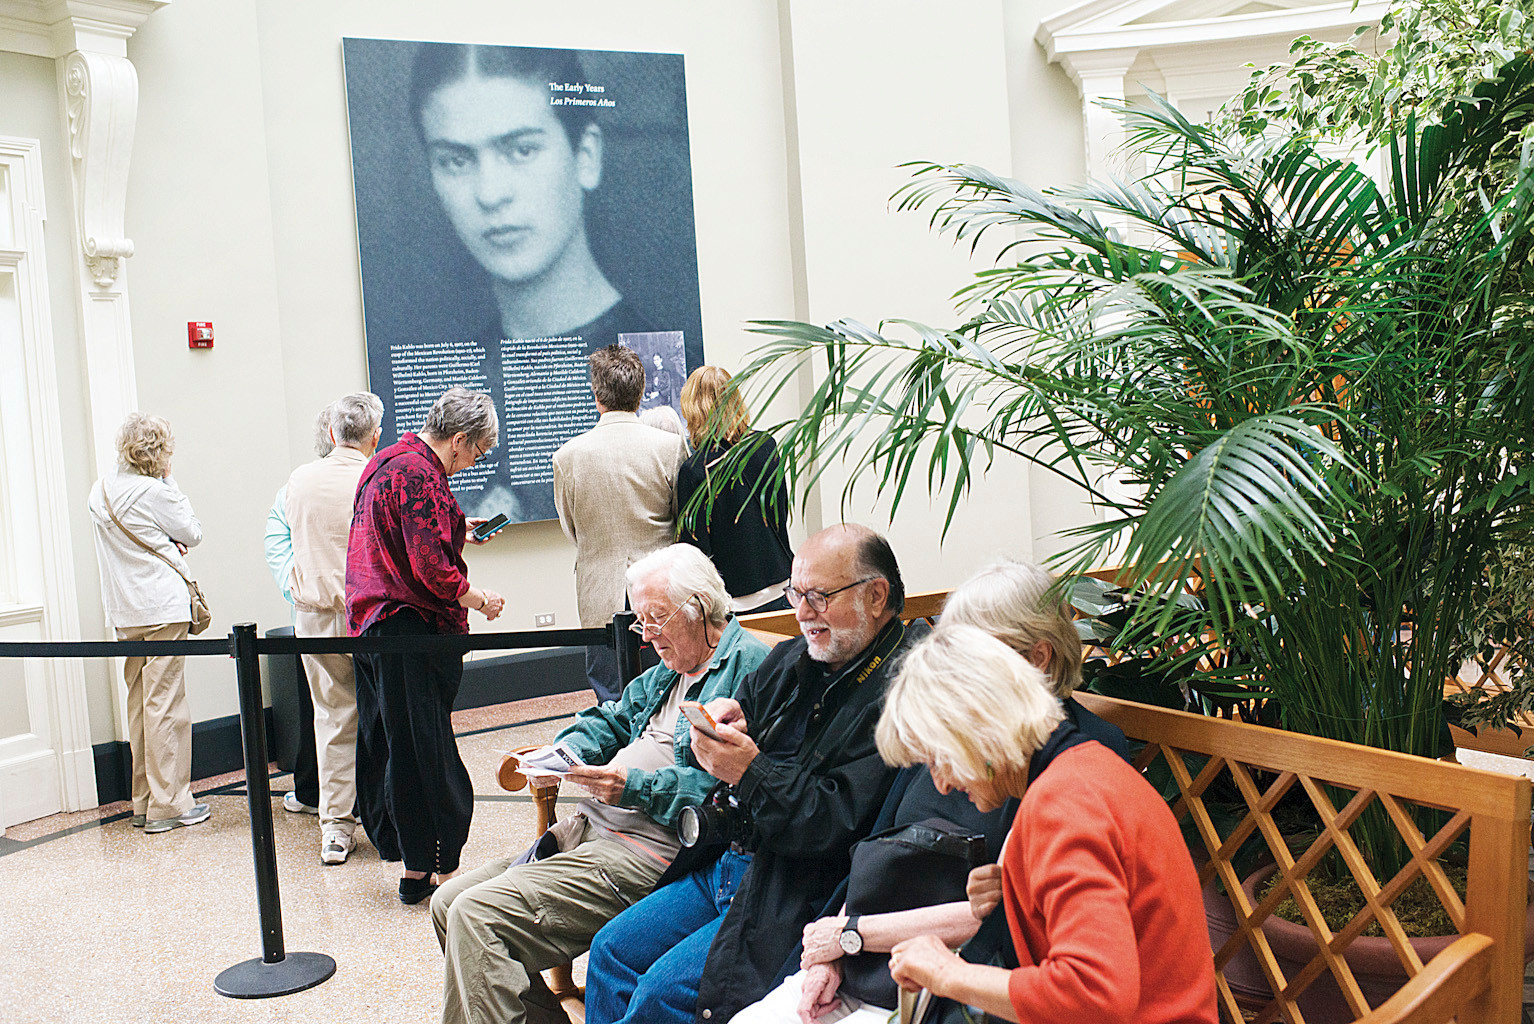 NYBG members take a seat to rest as the Frida Kahlo show spans the entire garden, from the conservatory to the rotunda building to the food on offer in the cantina - employees at the opening on may 15 described it as one of the biggest ever exhibitions for the institution.